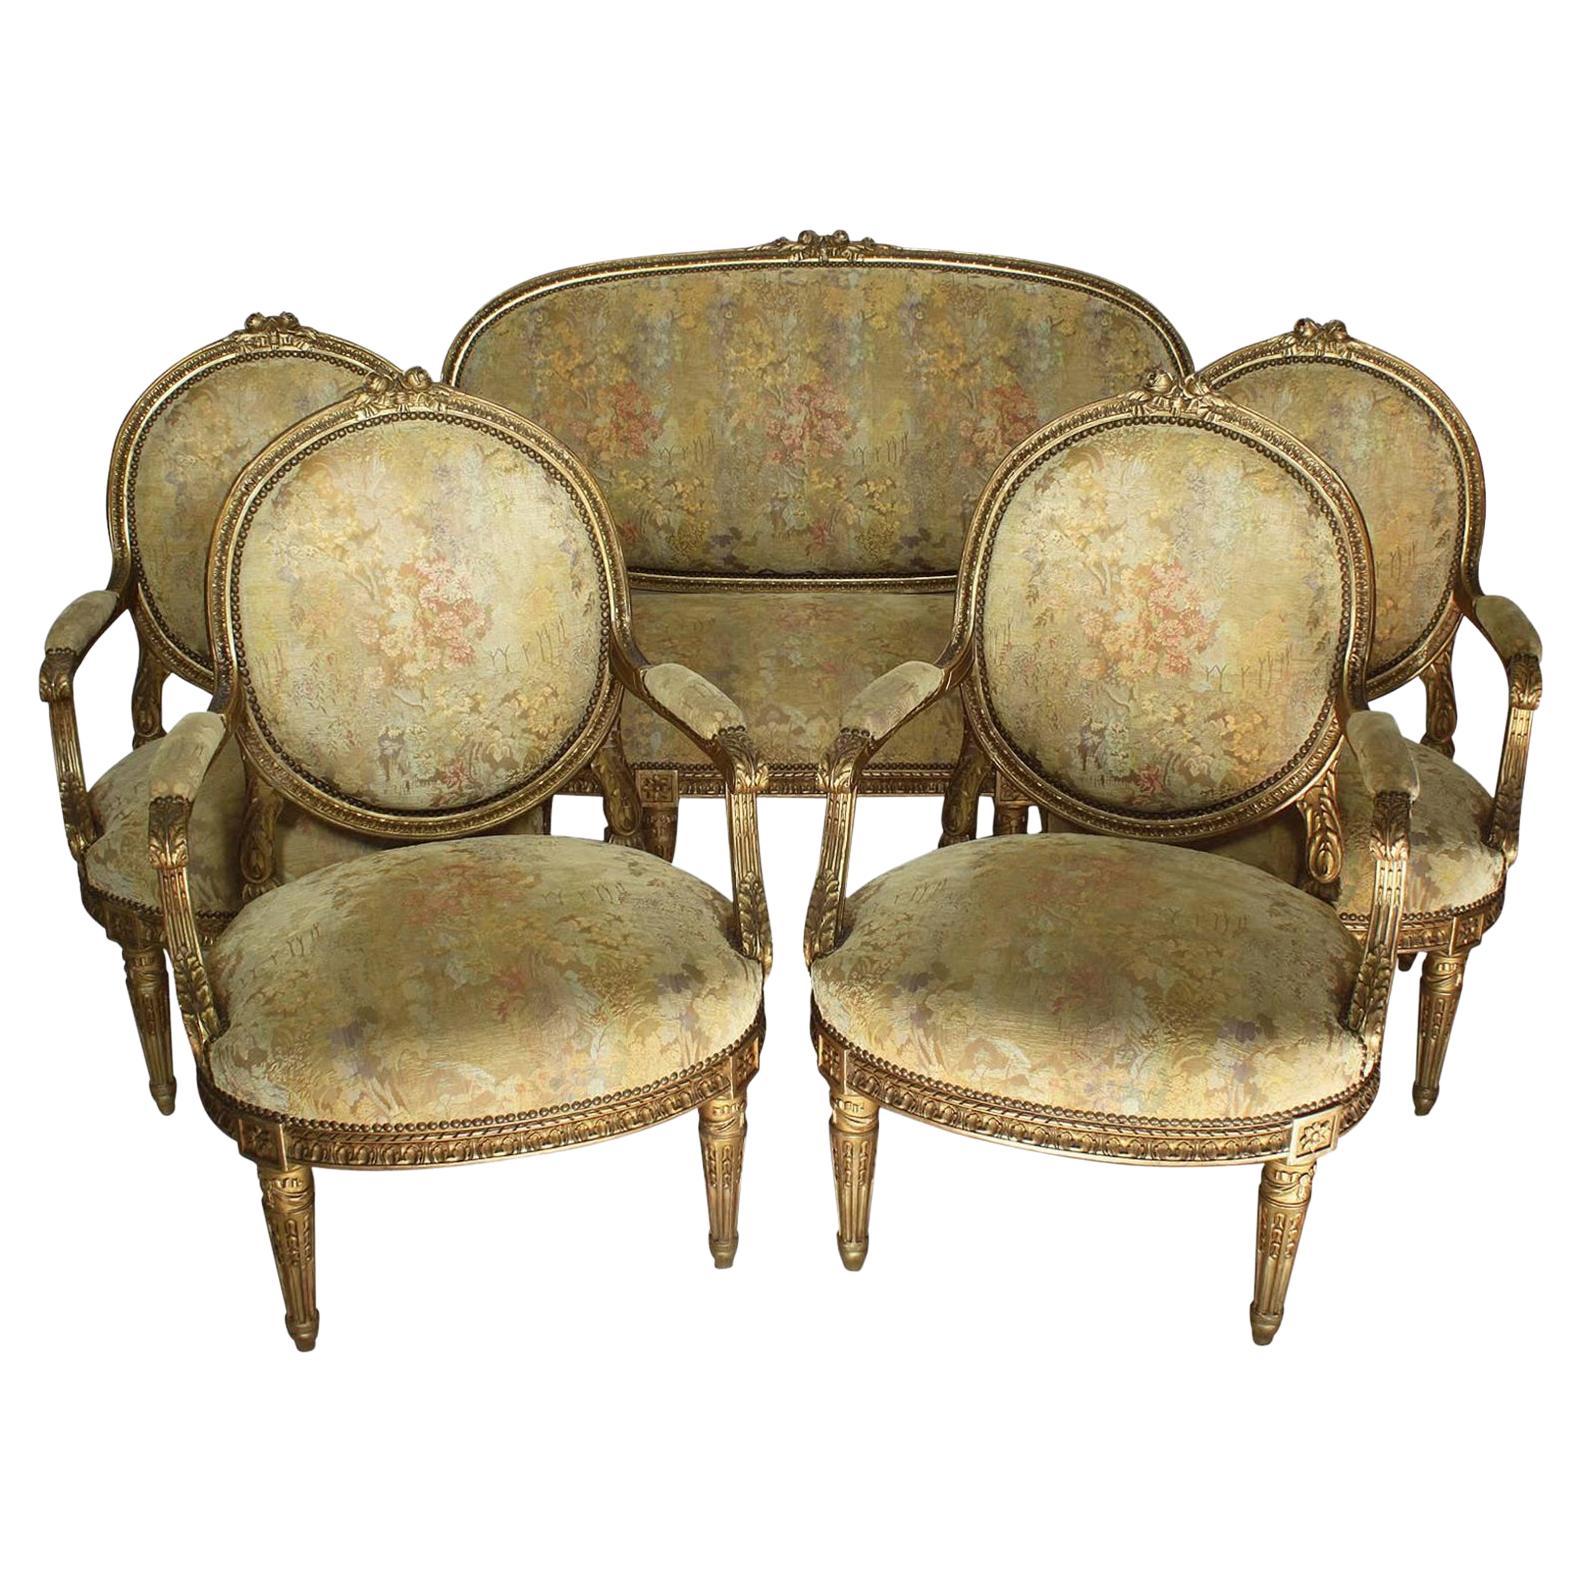 Fine French 19th Century Louis XVI Style Giltwood Carved Five-Piece Salon Suite